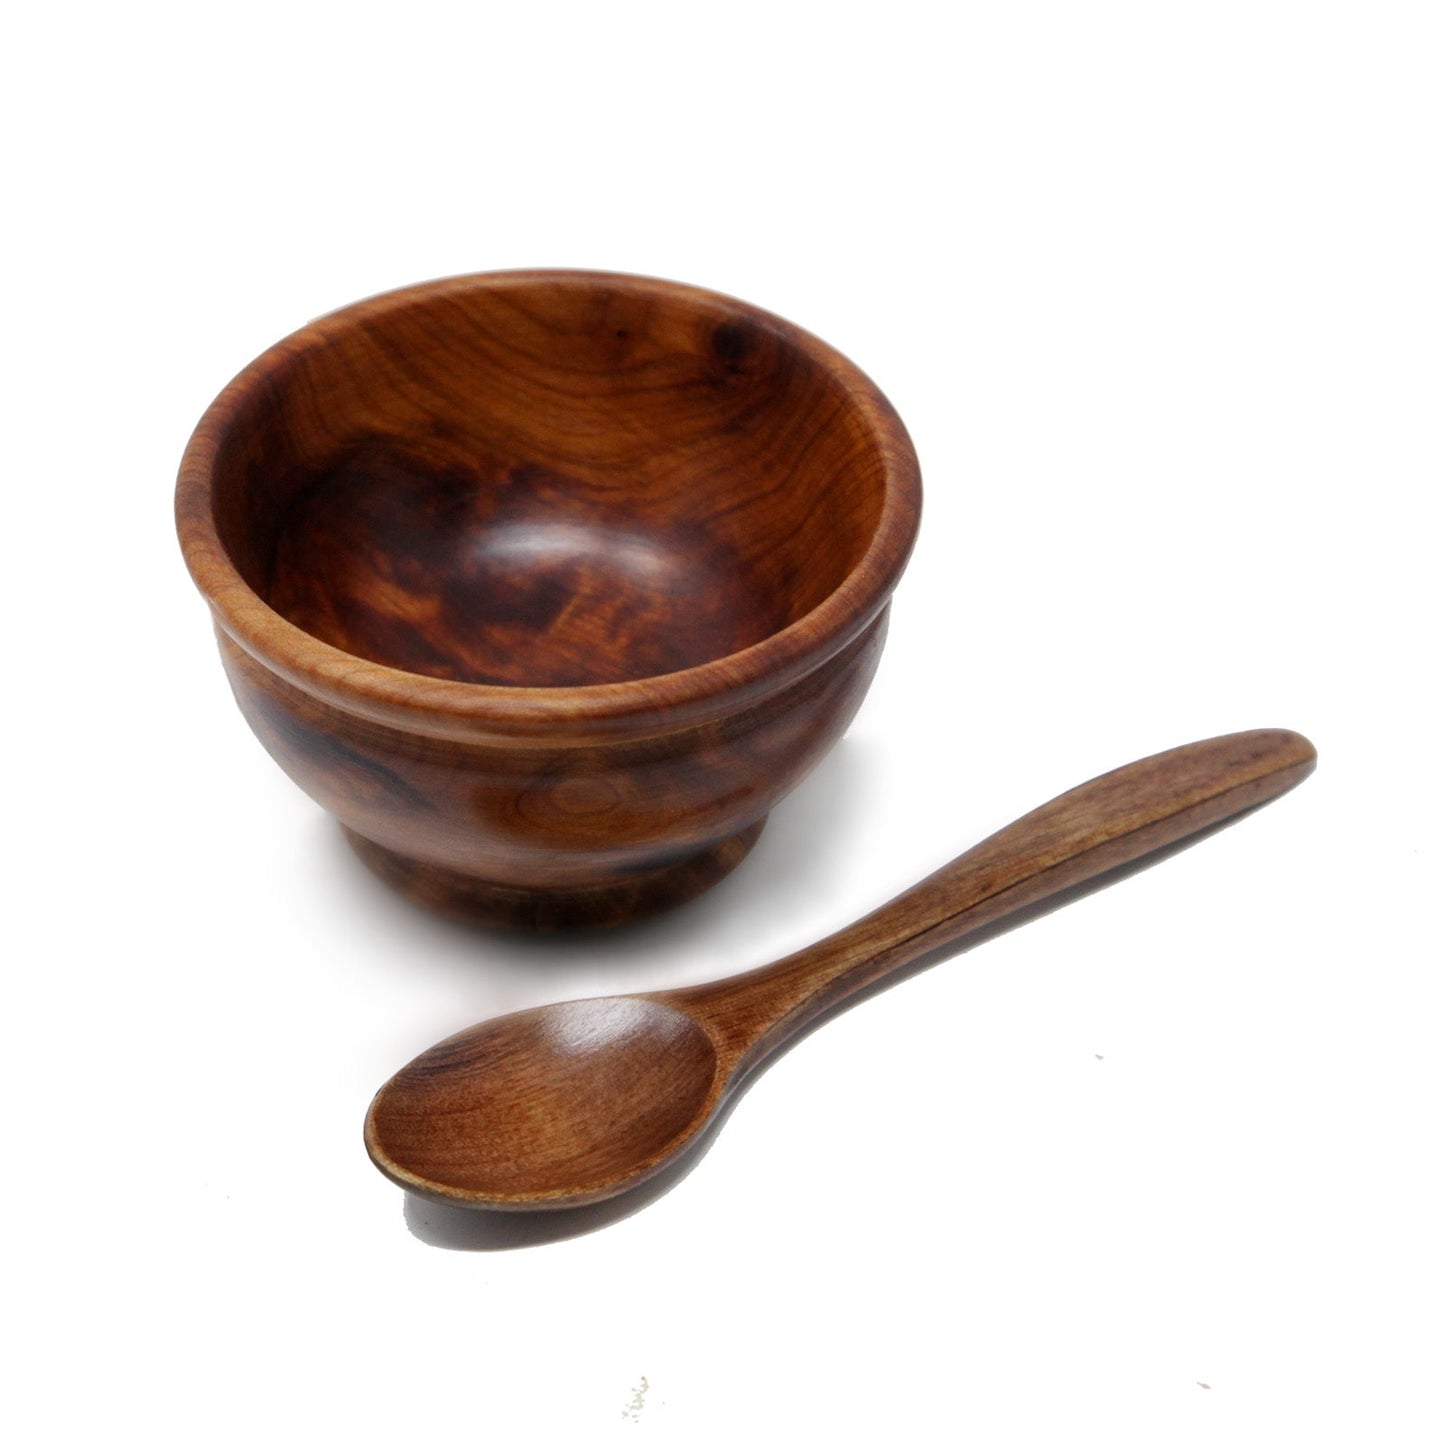 Handmade Wooden Face Mask Bowl and Spoon